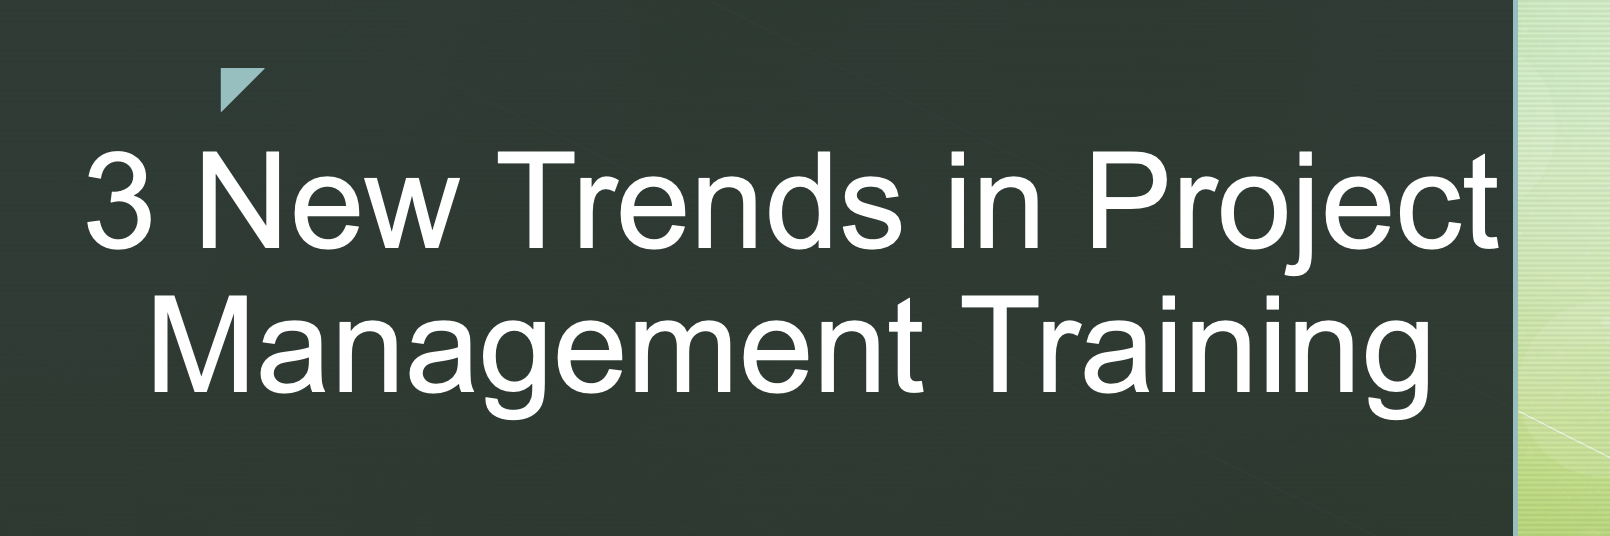 3 New Trends in Project Management Training